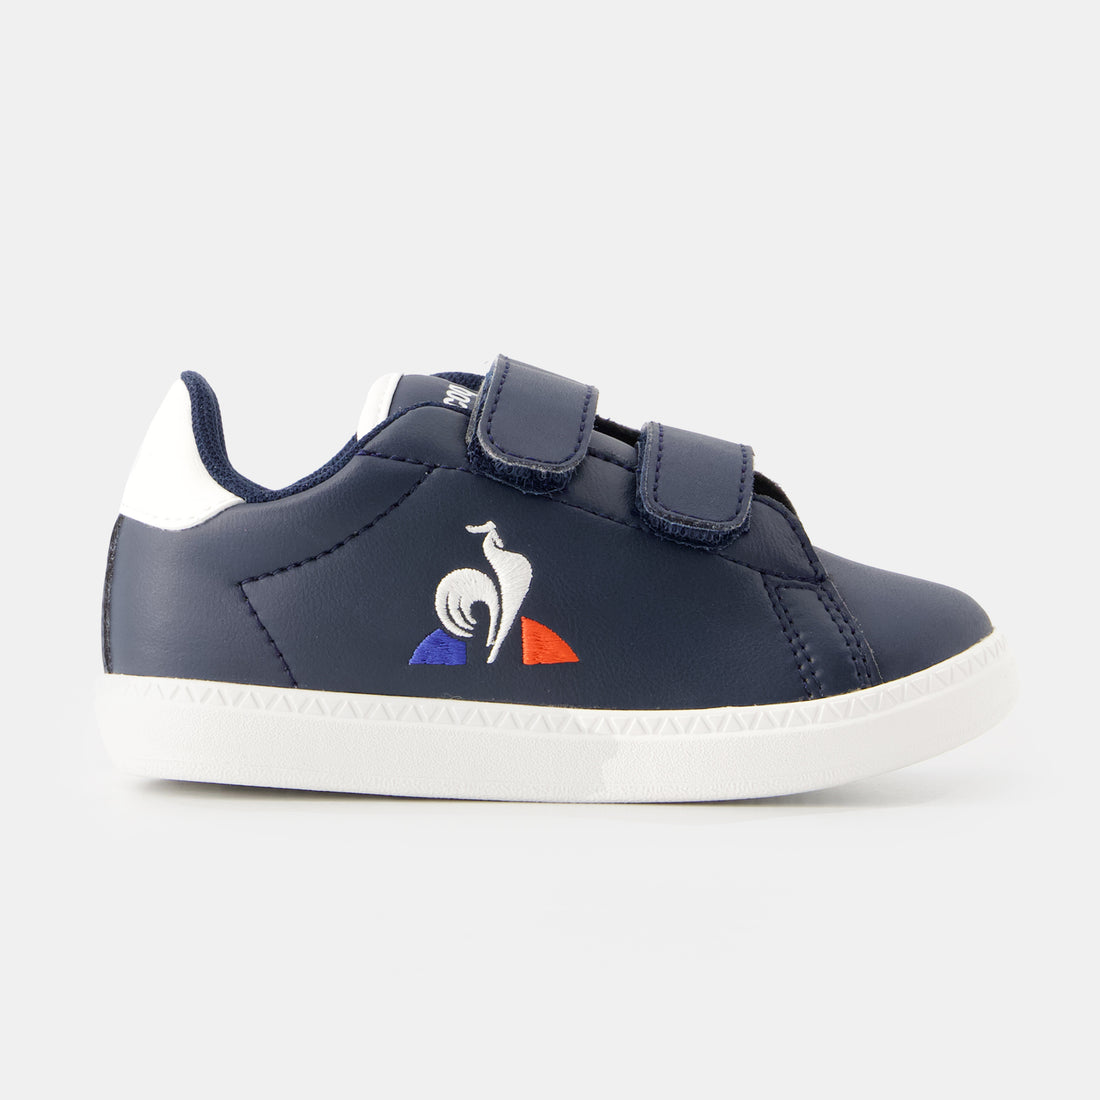 2410728-COURTSET_2 INF dress blue/optical white | Chaussures COURTSET_2 INF Enfant